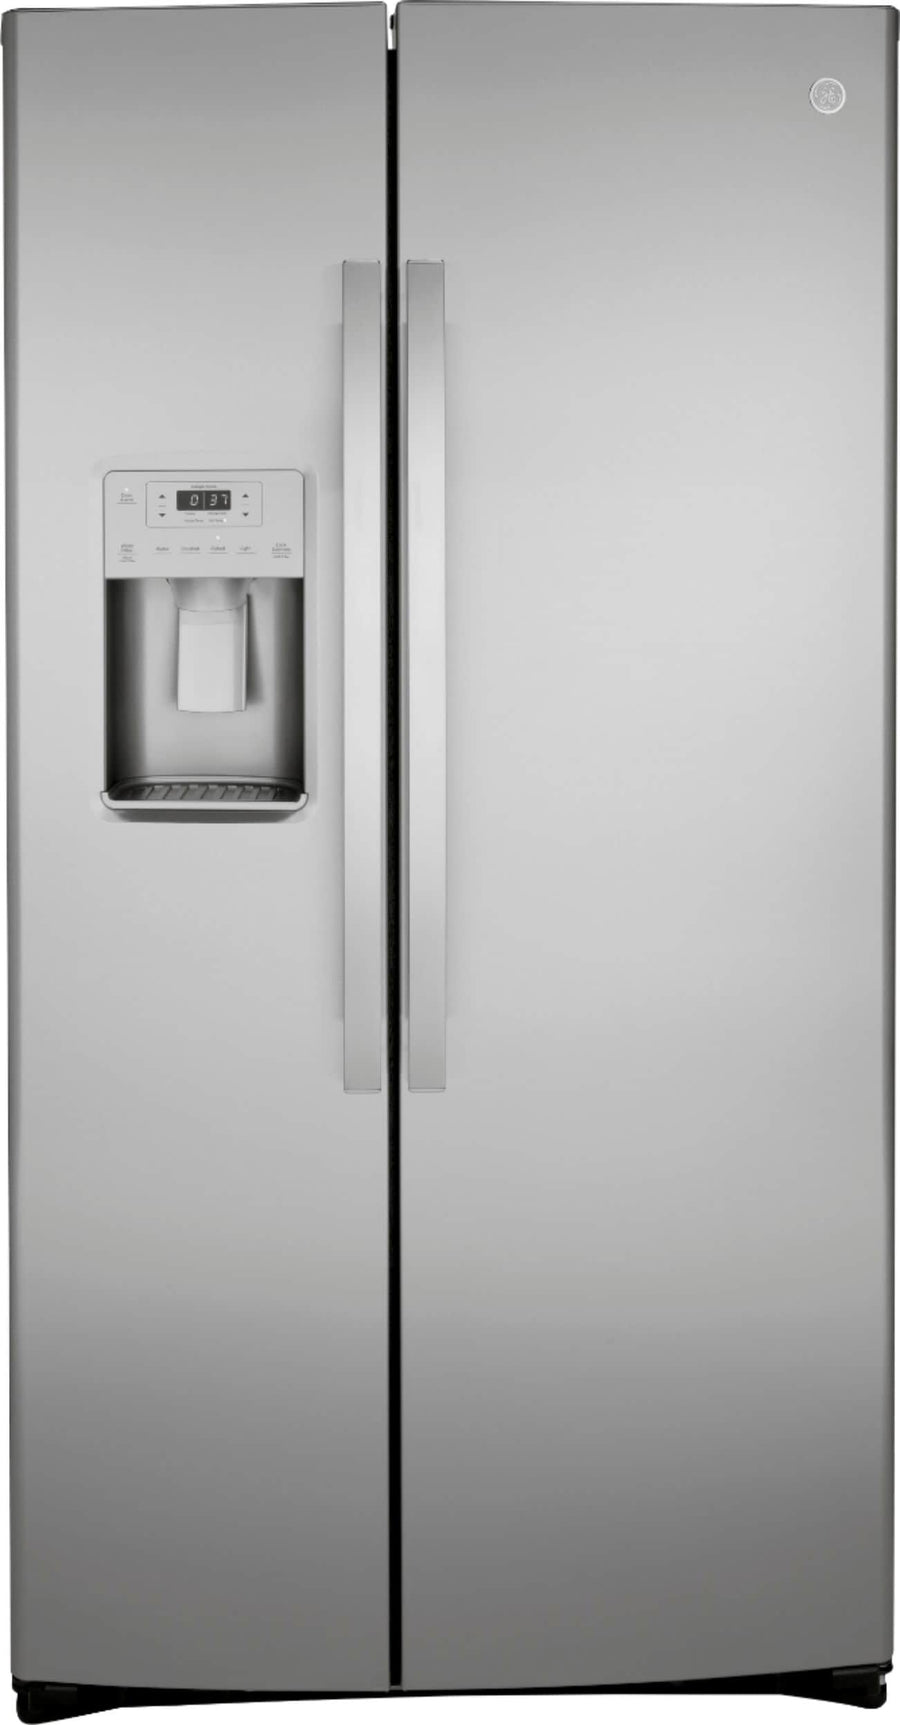 GE - 25.1 Cu. Ft. Side-By-Side Refrigerator with External Ice & Water Dispenser - Stainless steel_0